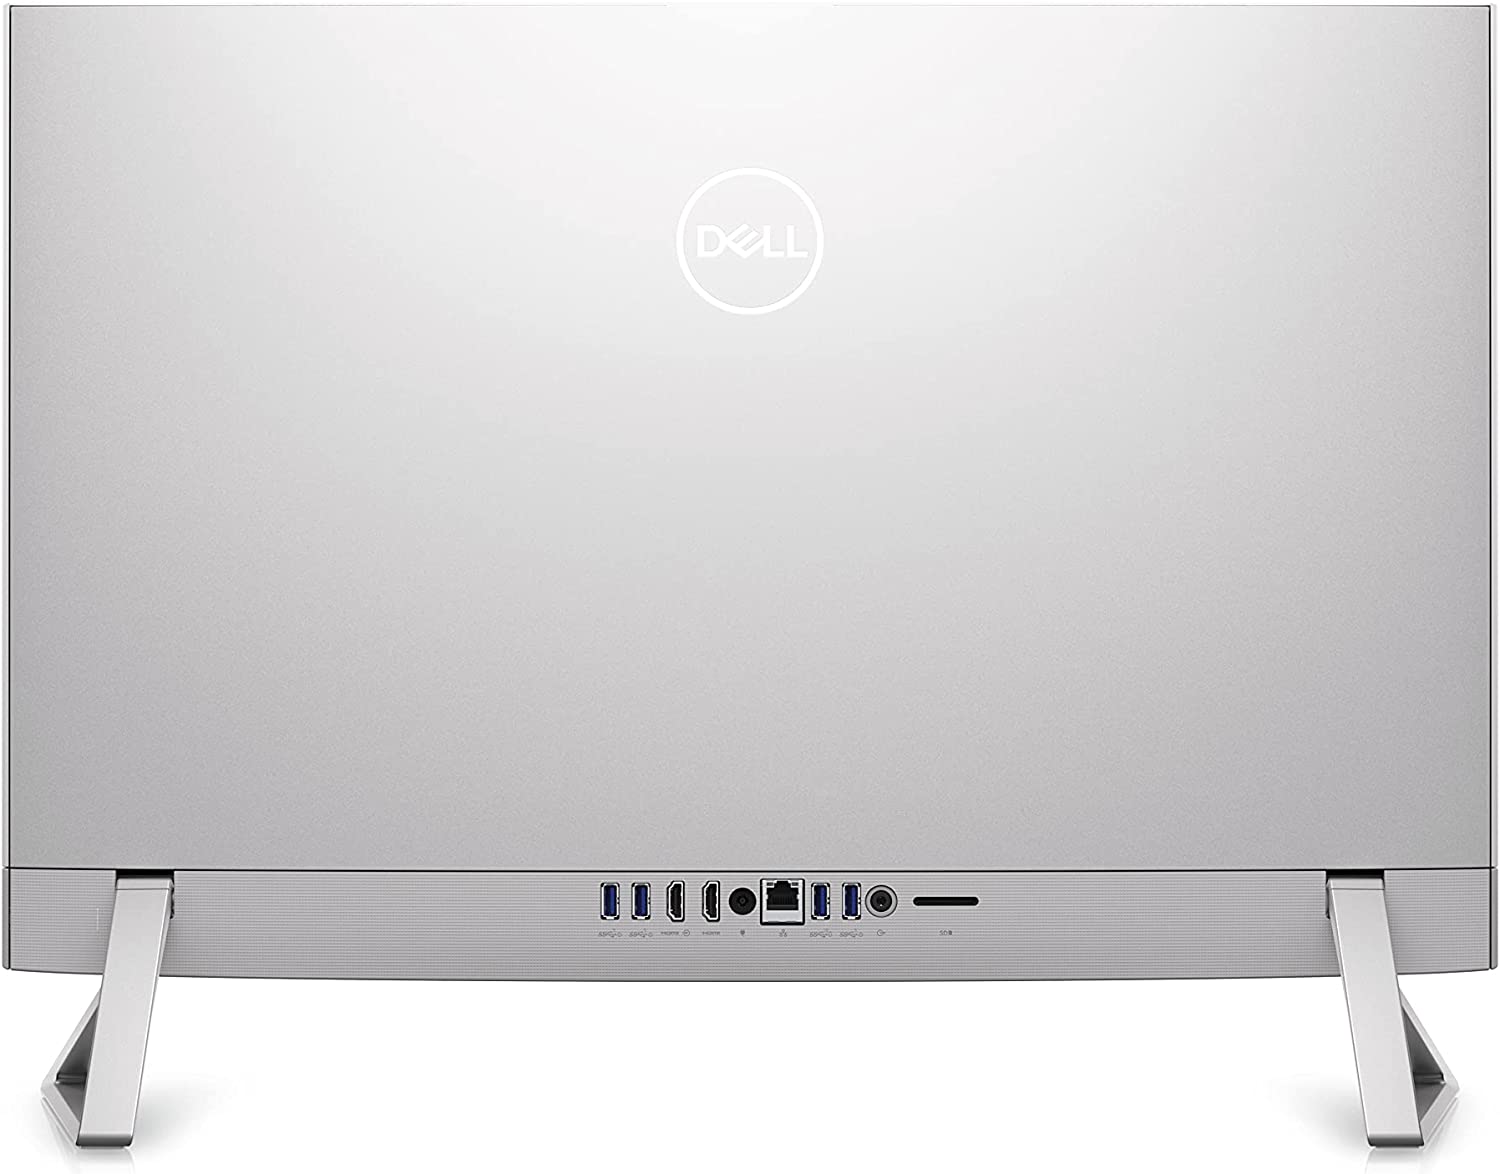 Dell Inspiron 7710 27" FHD Touchscreen All-in-One Desktop Computer ( 12th Gen Intel Core i7-1255U 10-Core up to 4.7 GHz CPU, 8GB RAM, 256Gb SSD + 1tb hdd ) Windows 11 Home